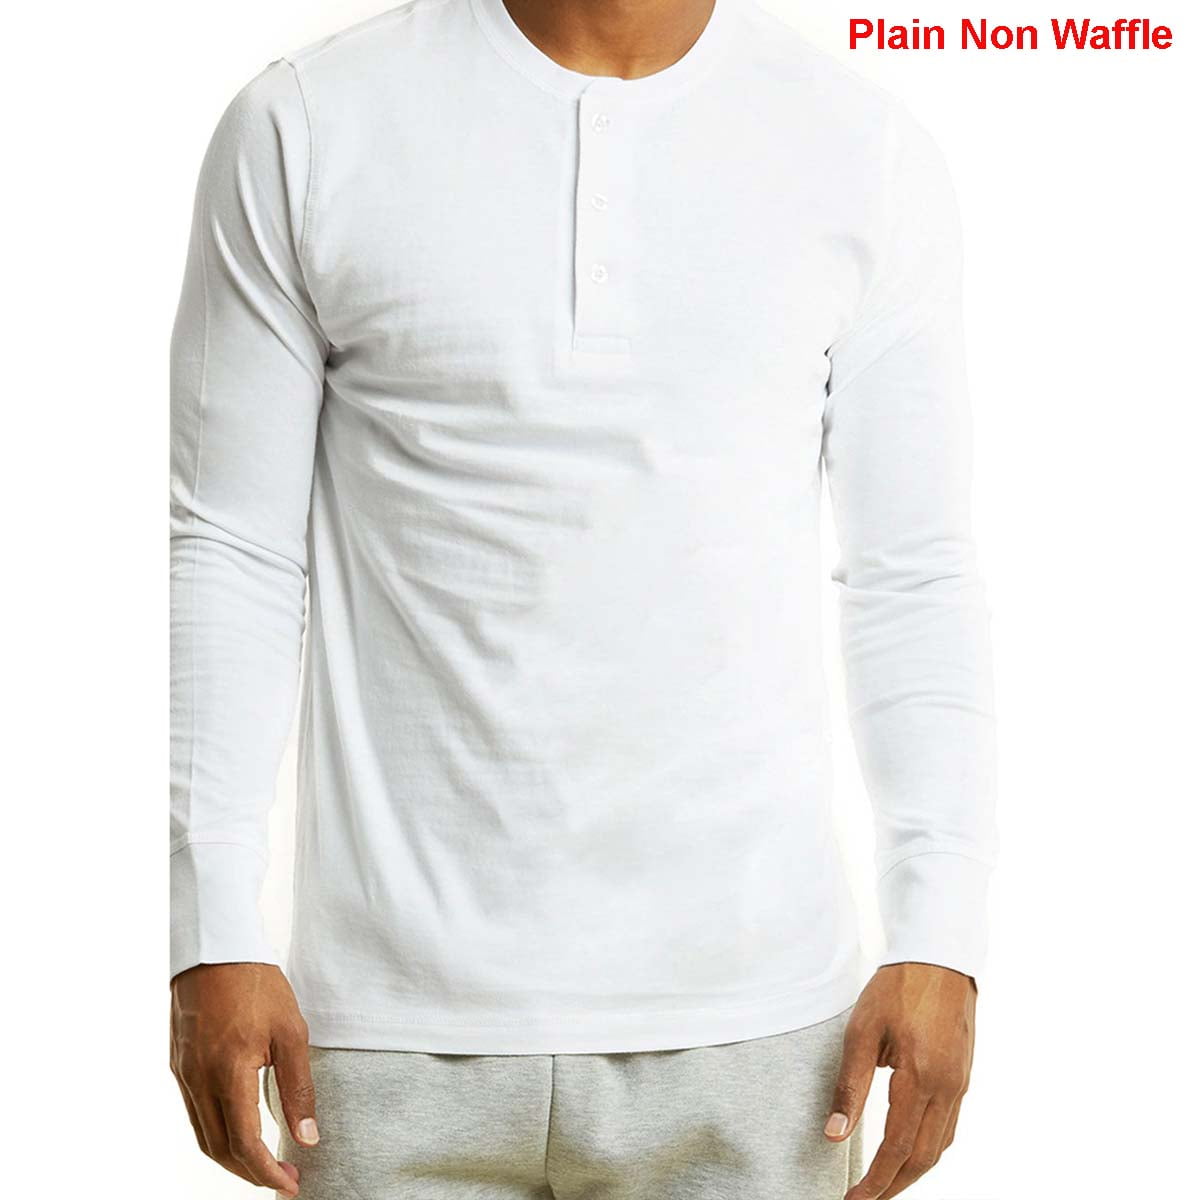 SLM Men's 100% Cotton Thermal Top Waffle Knit Henley Undershirt 